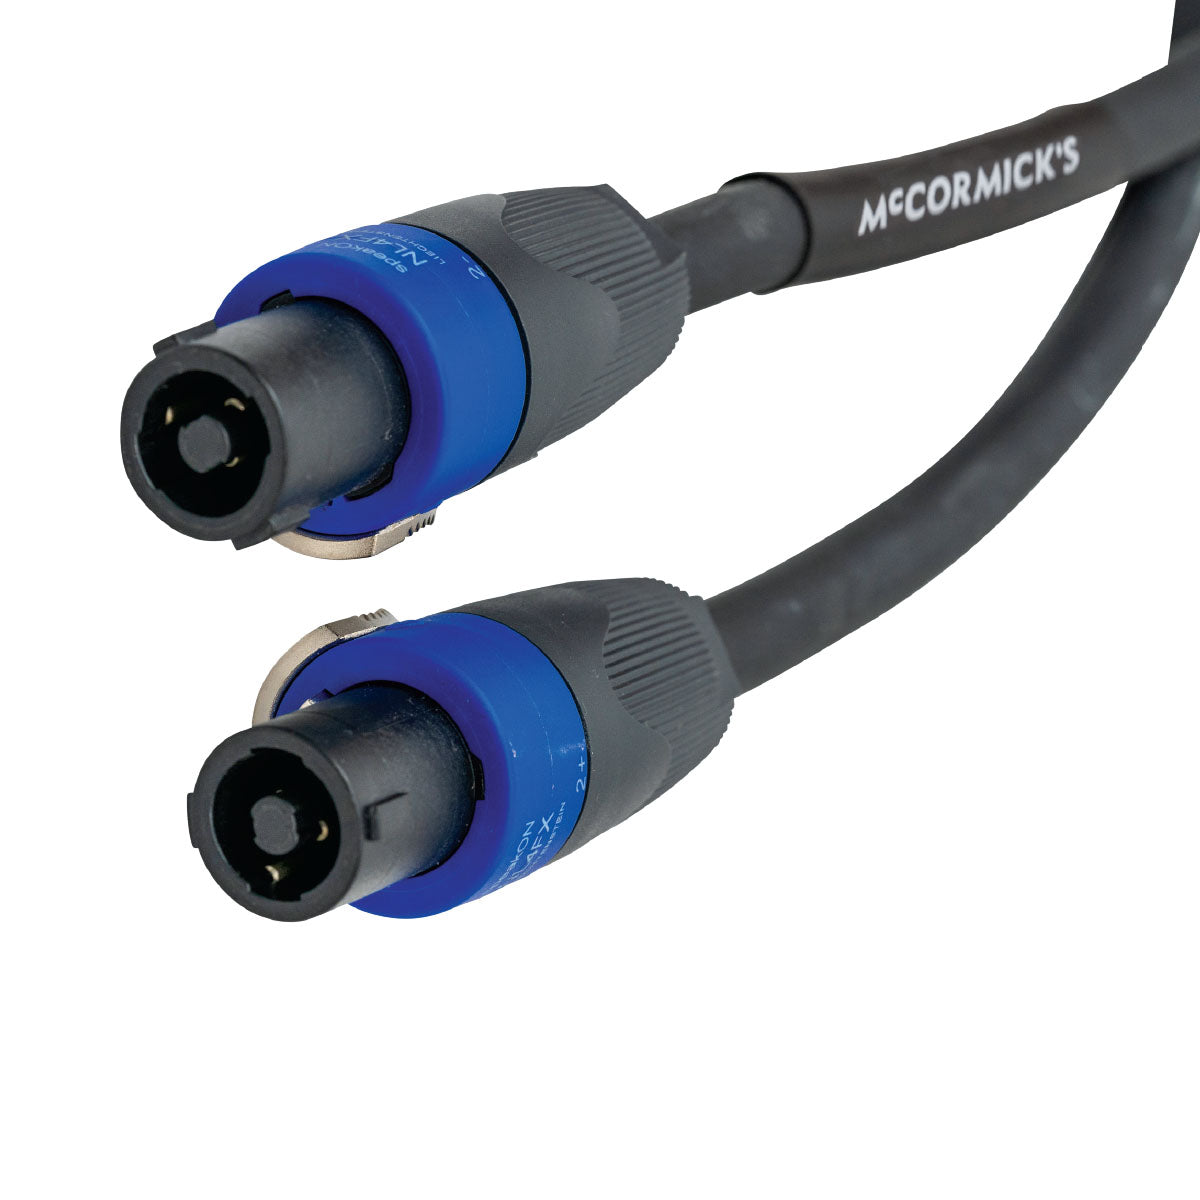 McCormick’s 4-Line Speaker Cable